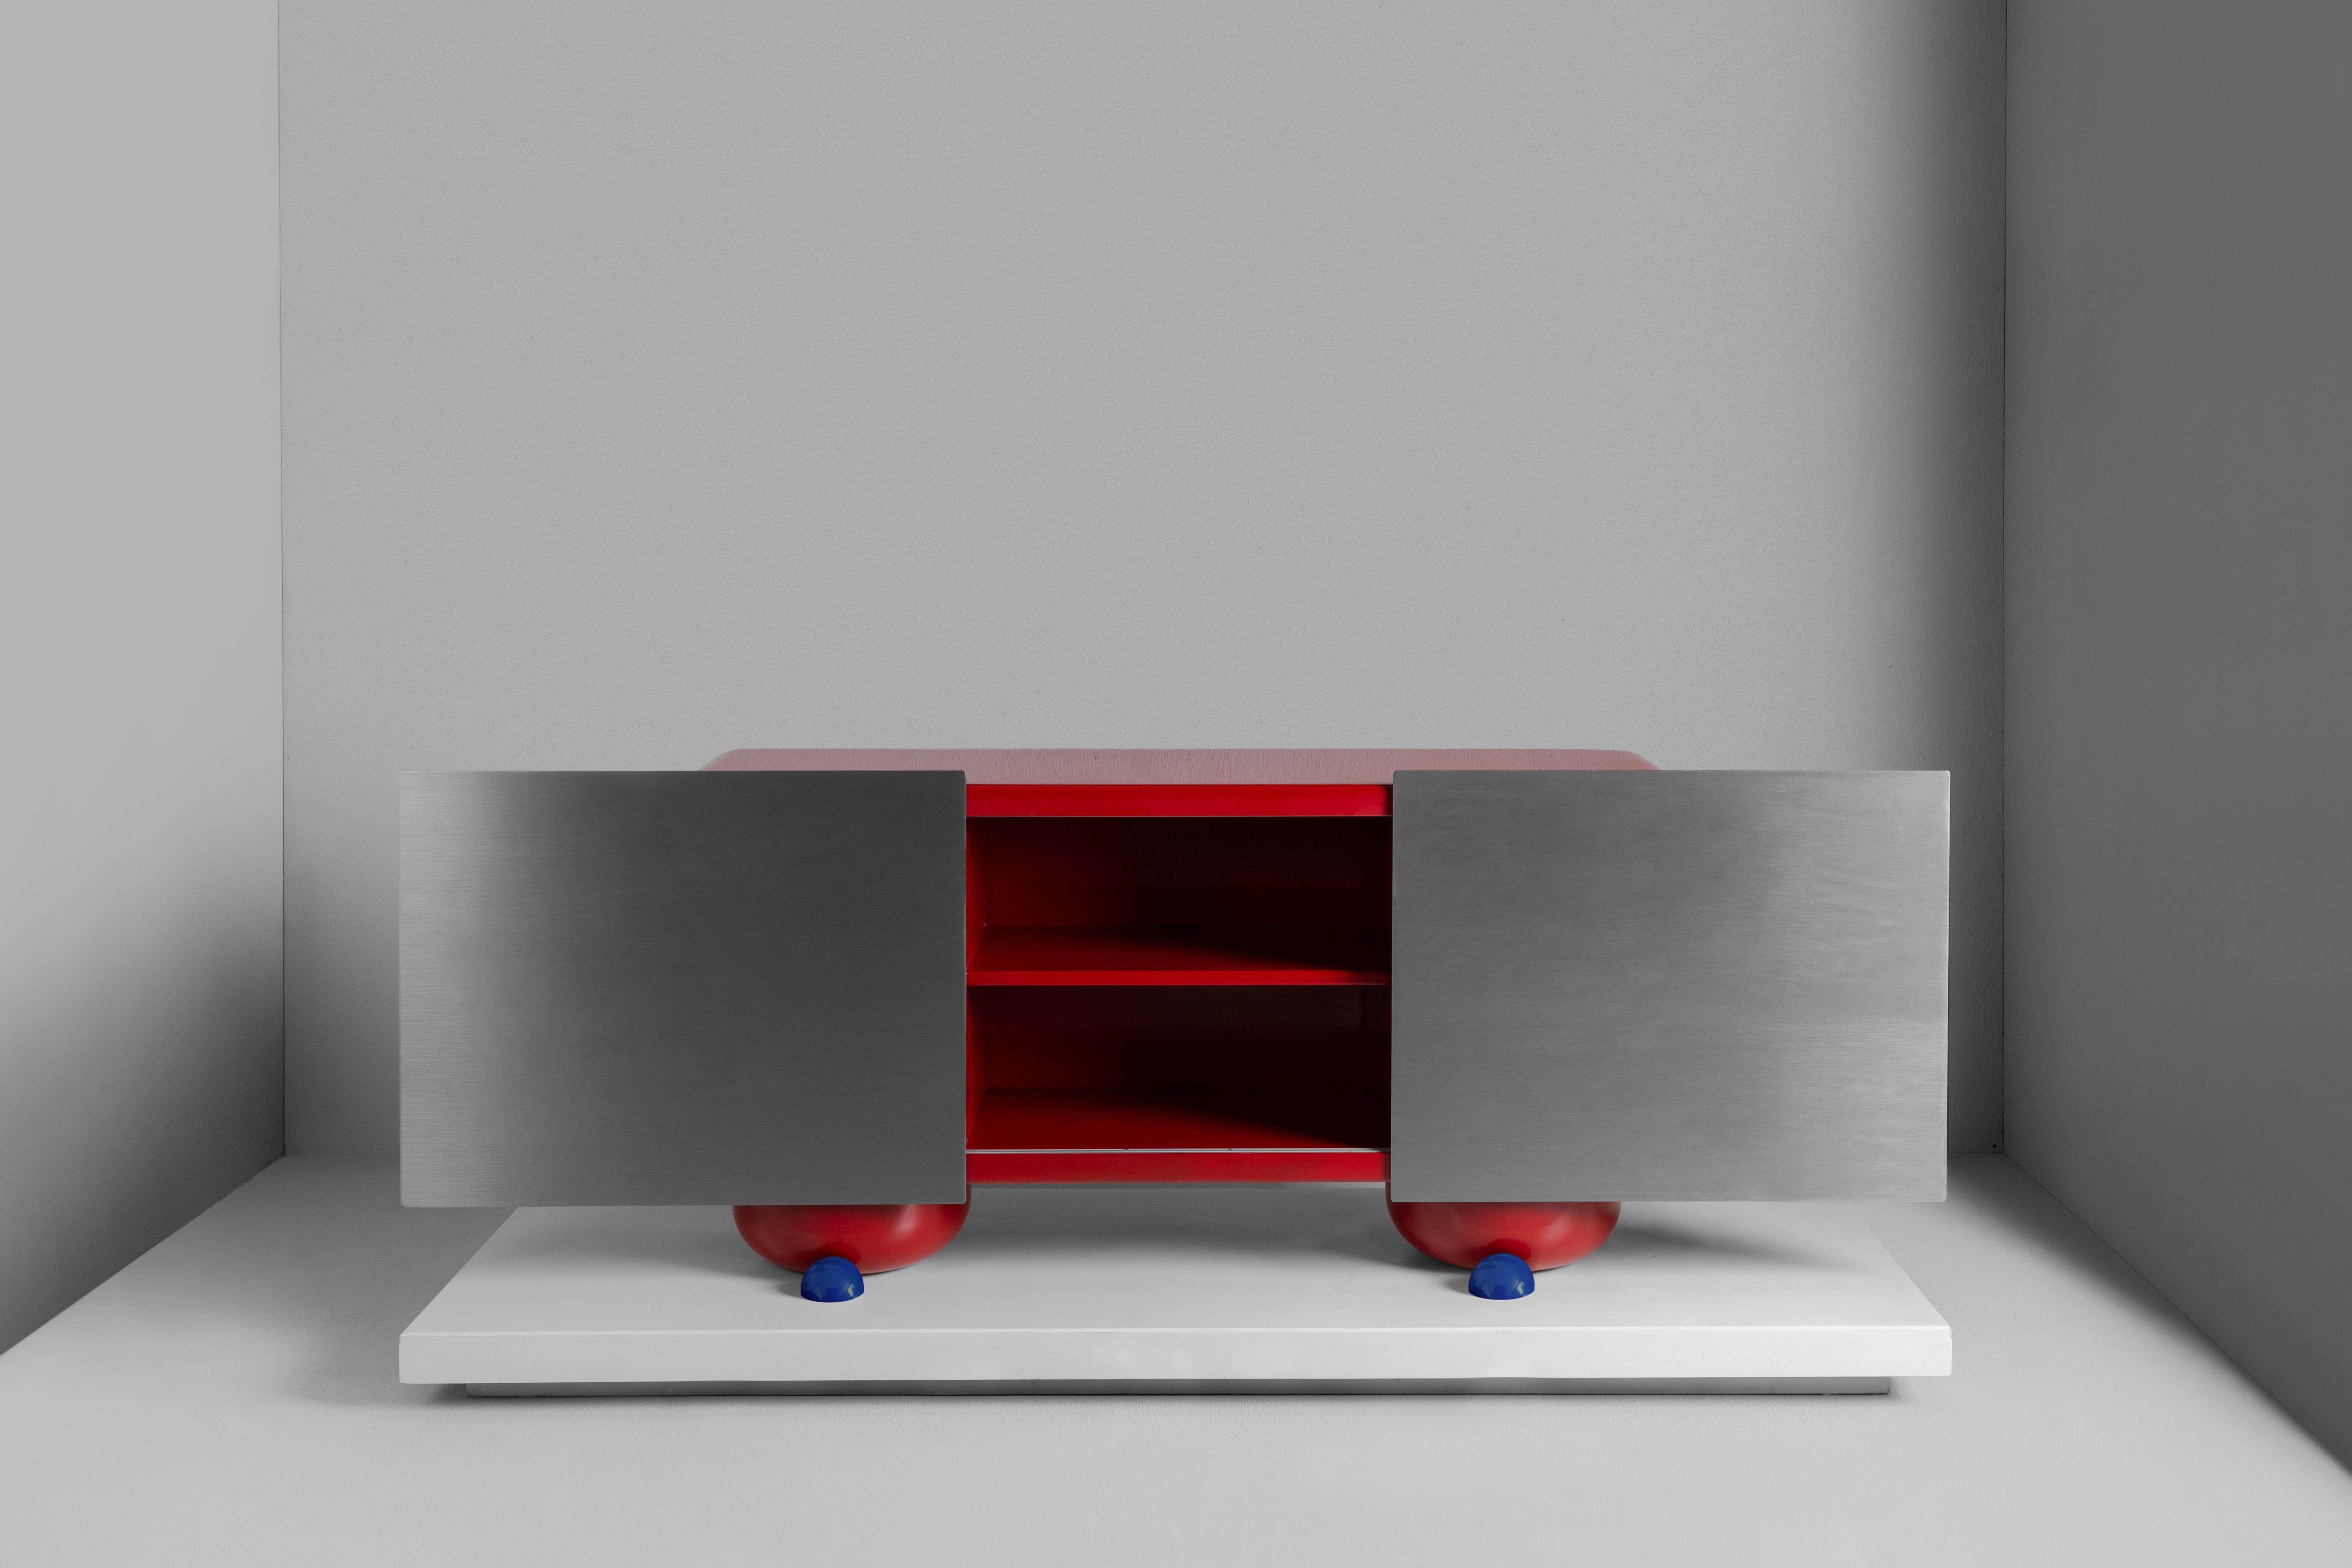 Cromo (II) Console by Breuer
Dimensions: D 52 x W 180 x H 85 cm.
Materials: High-gloss lacquered wood, steel.

Cromo is inspired by the duality of nature and technology. This collection is characterized by its ability to capture the essence of pure